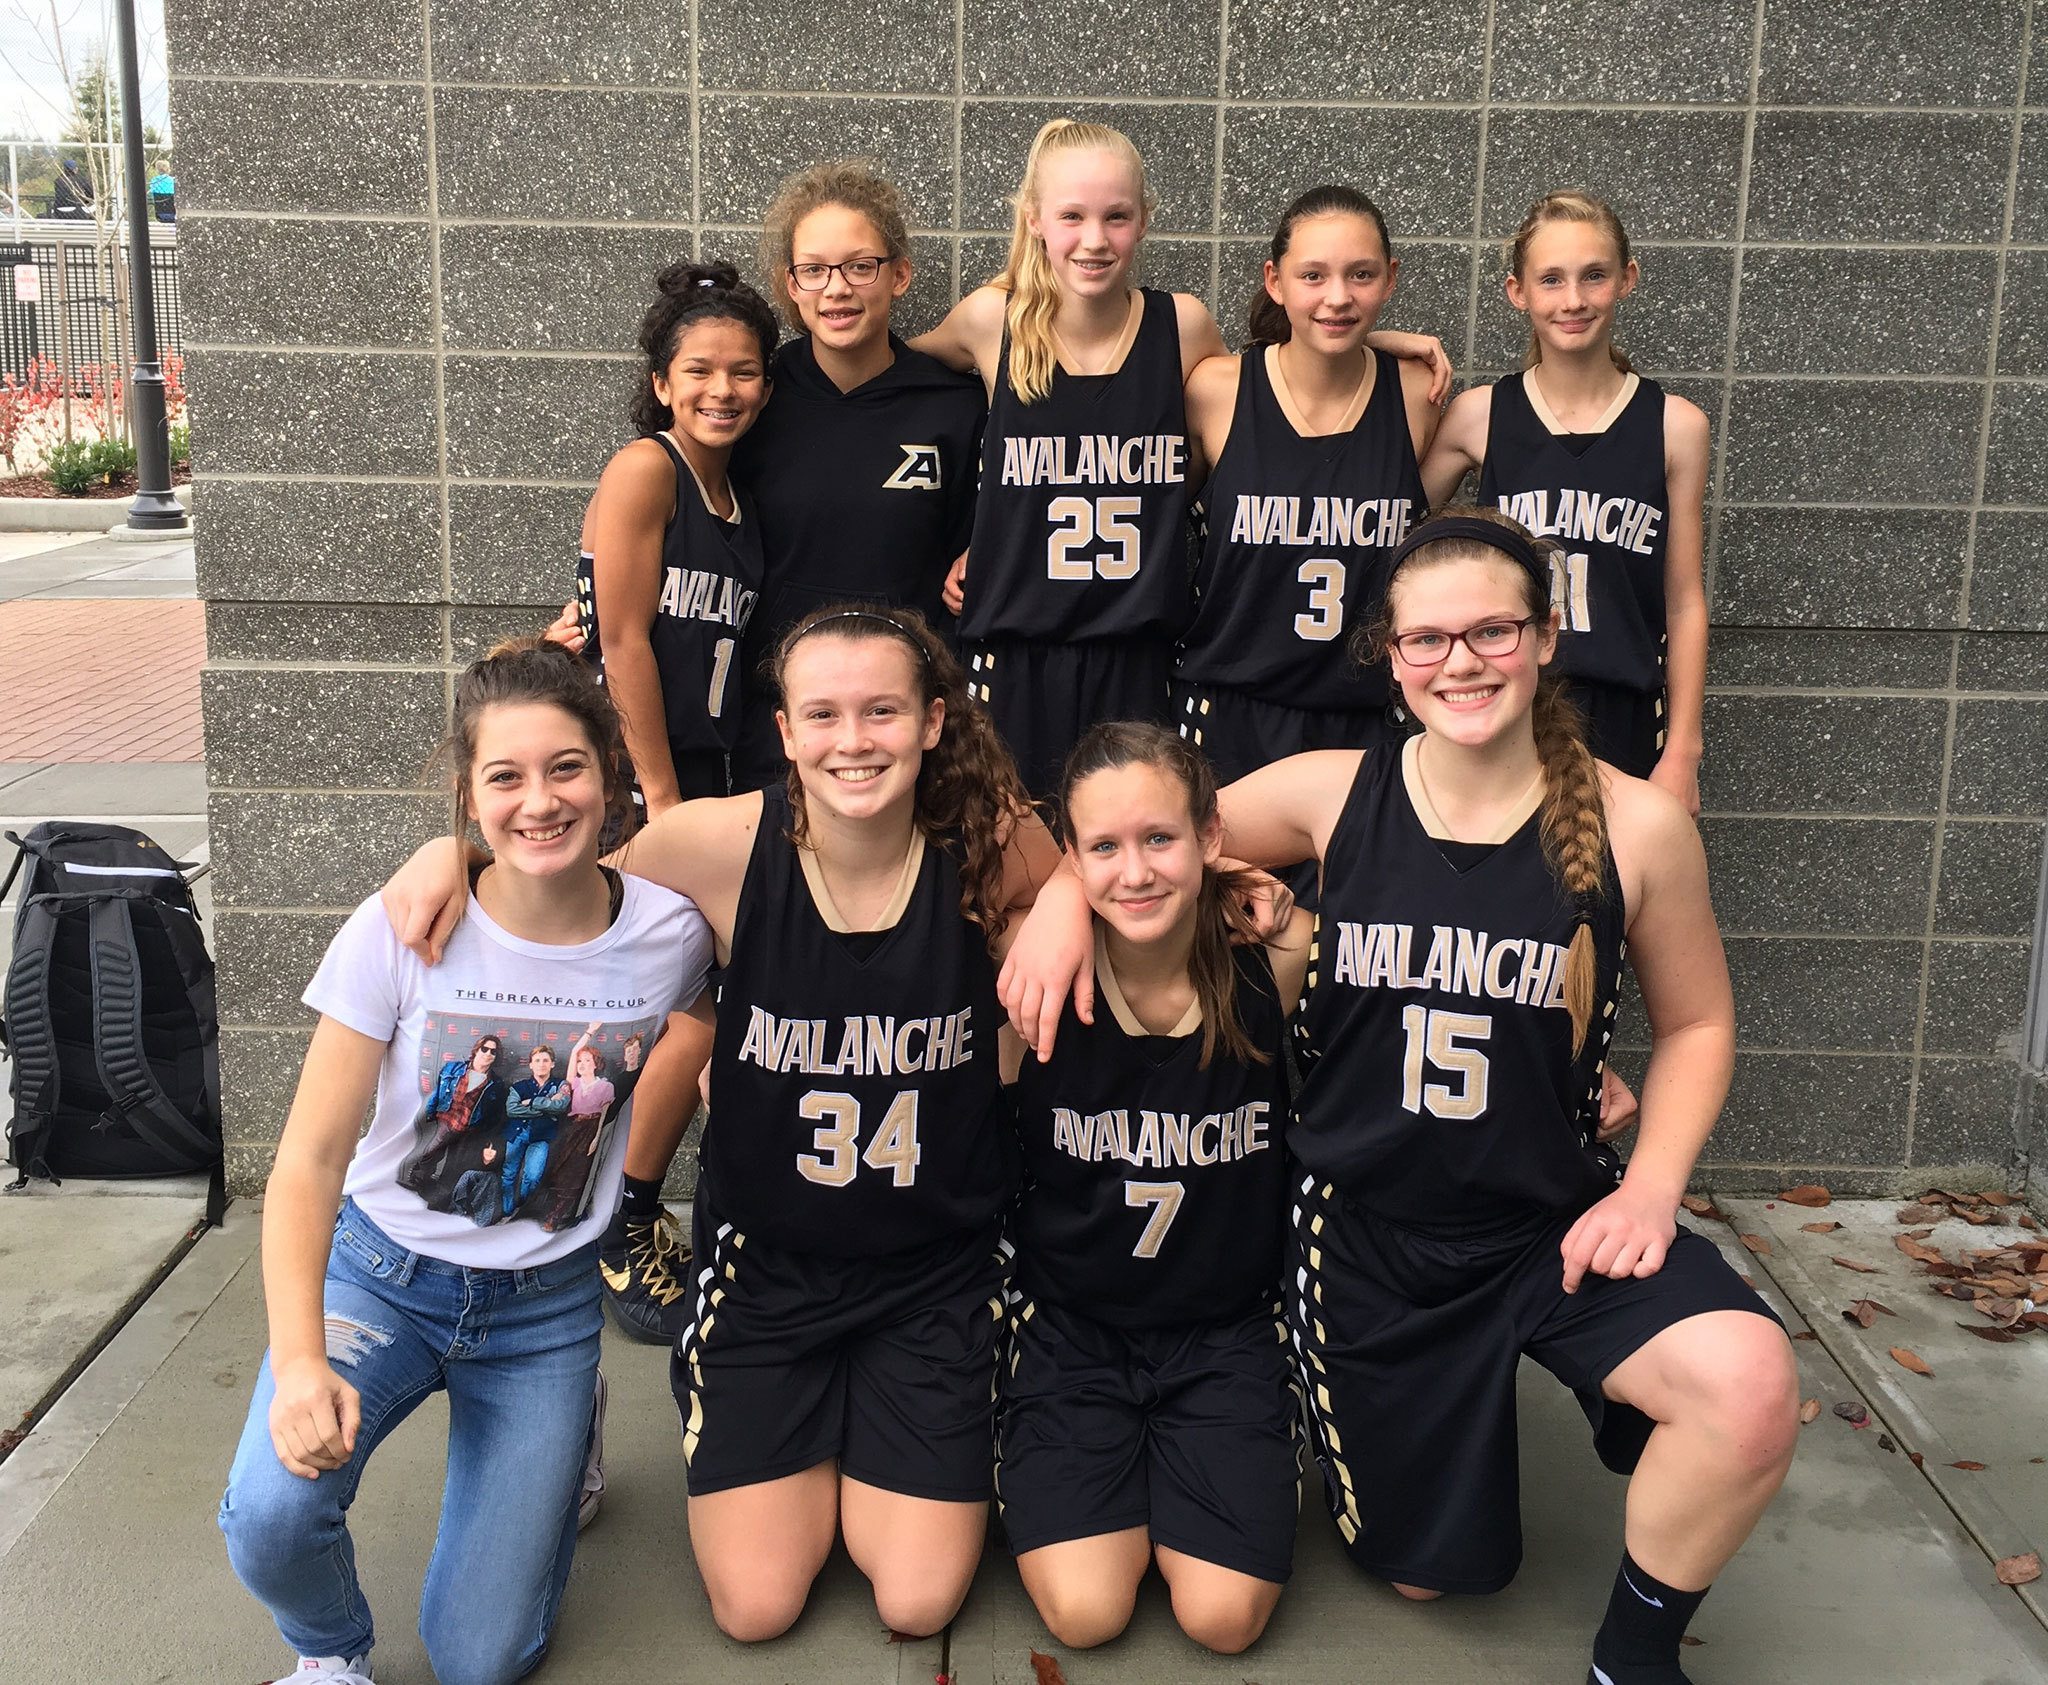 The Avalanche Black eighth grade girls basketball team went 3-1 at its first basketball tournament of the season last weekend. Front row, from left, manager Khloe Stanard, Jaida Wood, Hannah Reetz and Myra Walker. Back row, from left, Camille Stensgard, Maddie Cooke, Maggie Ruddell, Jada Cargo and Emilia Long.